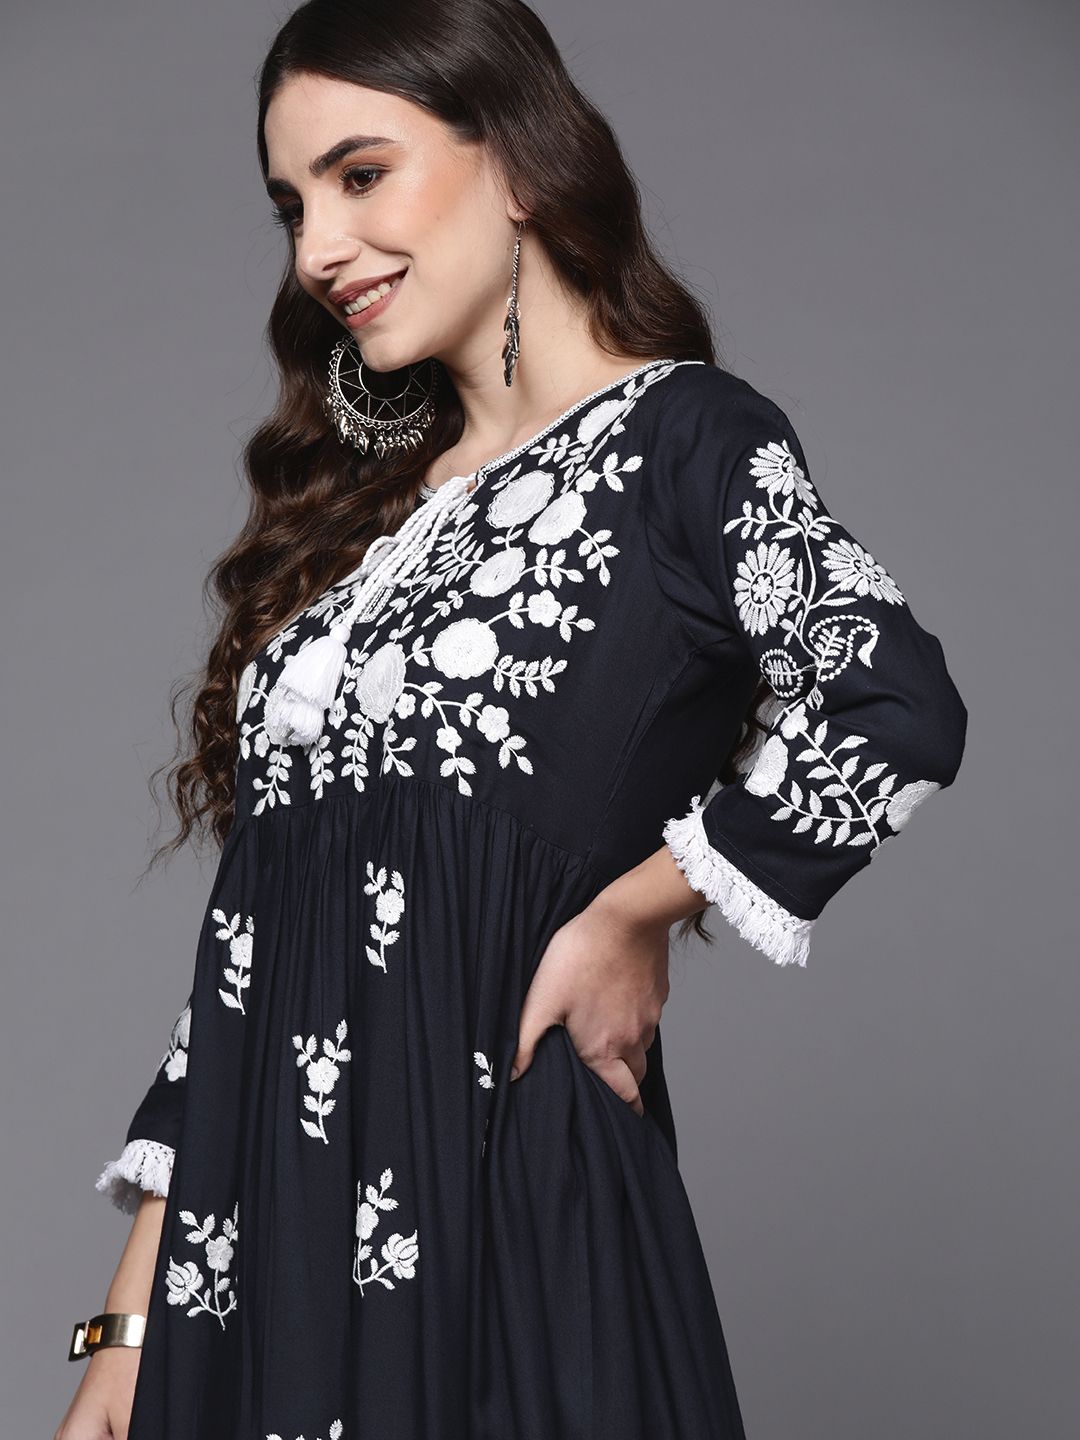 Indo Era Navy Blue & White Floral Embroidered Tie-Up Neck Ethnic A-Line Midi Dress Price in India